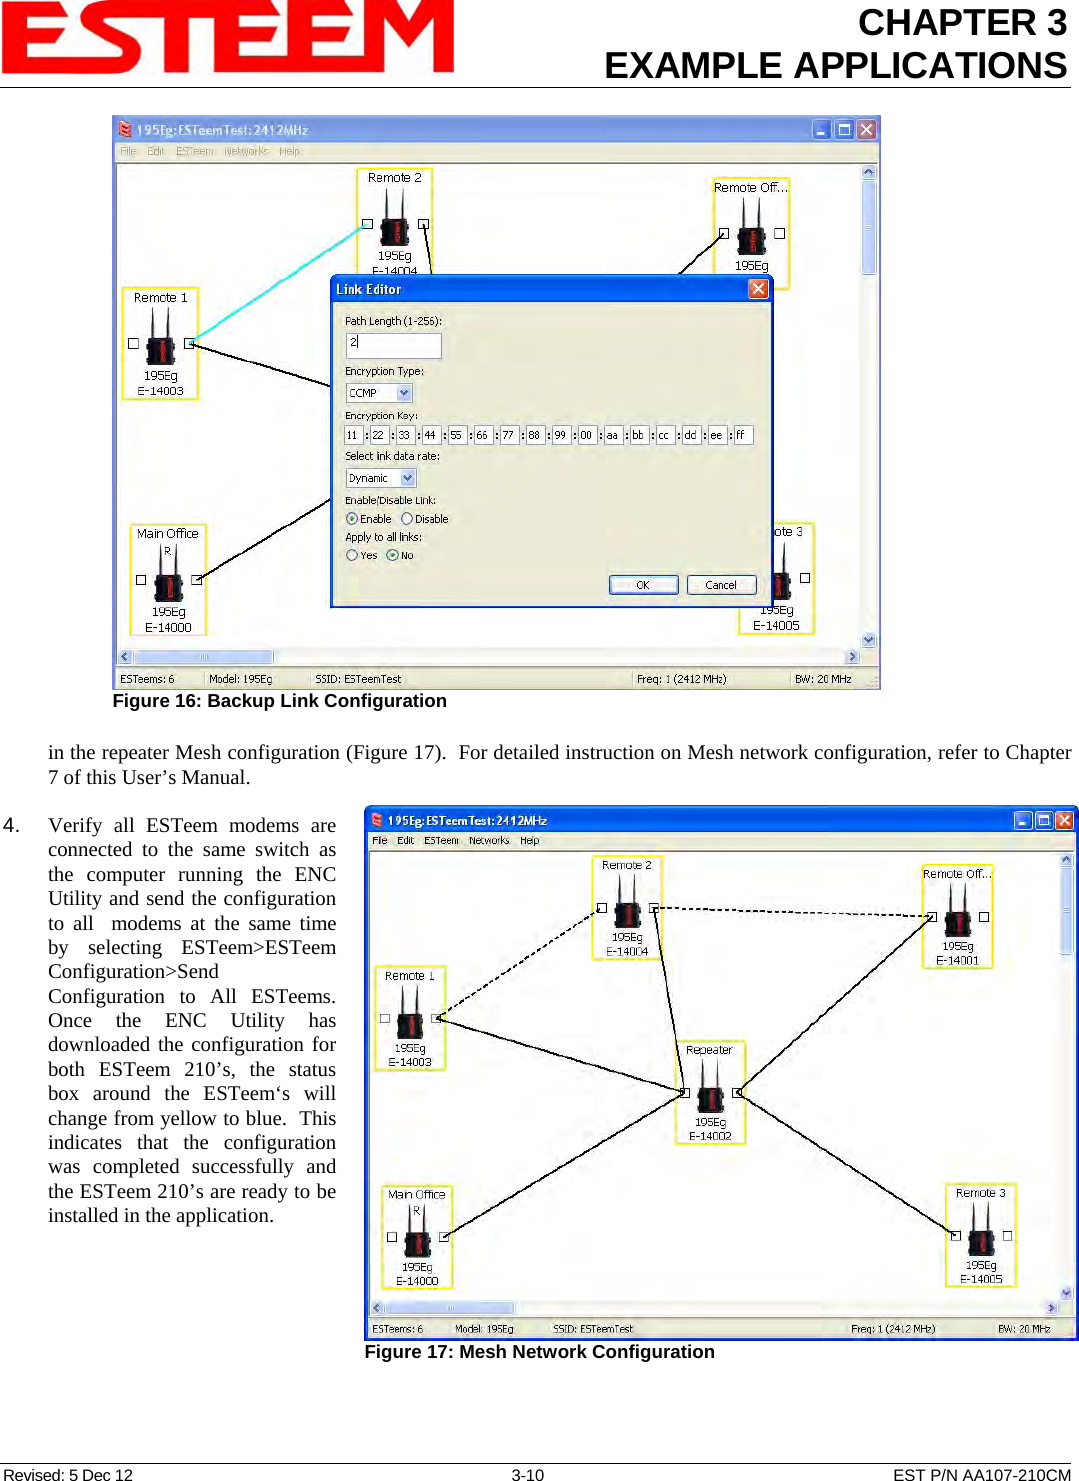 CHAPTER 3 EXAMPLE APPLICATIONS  in the repeater Mesh configuration (Figure 17).  For detailed instruction on Mesh network configuration, refer to Chapter 7 of this User’s Manual.  Figure 16: Backup Link Configuration   4.    Verify all ESTeem modems are connected to the same switch as the computer running the ENC Utility and send the configuration to all  modems at the same time by selecting ESTeem&gt;ESTeem Configuration&gt;Send Configuration to All ESTeems. Once the ENC Utility has downloaded the configuration for both ESTeem 210’s, the status box around the ESTeem‘s will change from yellow to blue.  This indicates that the configuration was completed successfully and the ESTeem 210’s are ready to be installed in the application.  Figure 17: Mesh Network Configuration  Revised: 5 Dec 12  3-10  EST P/N AA107-210CM 